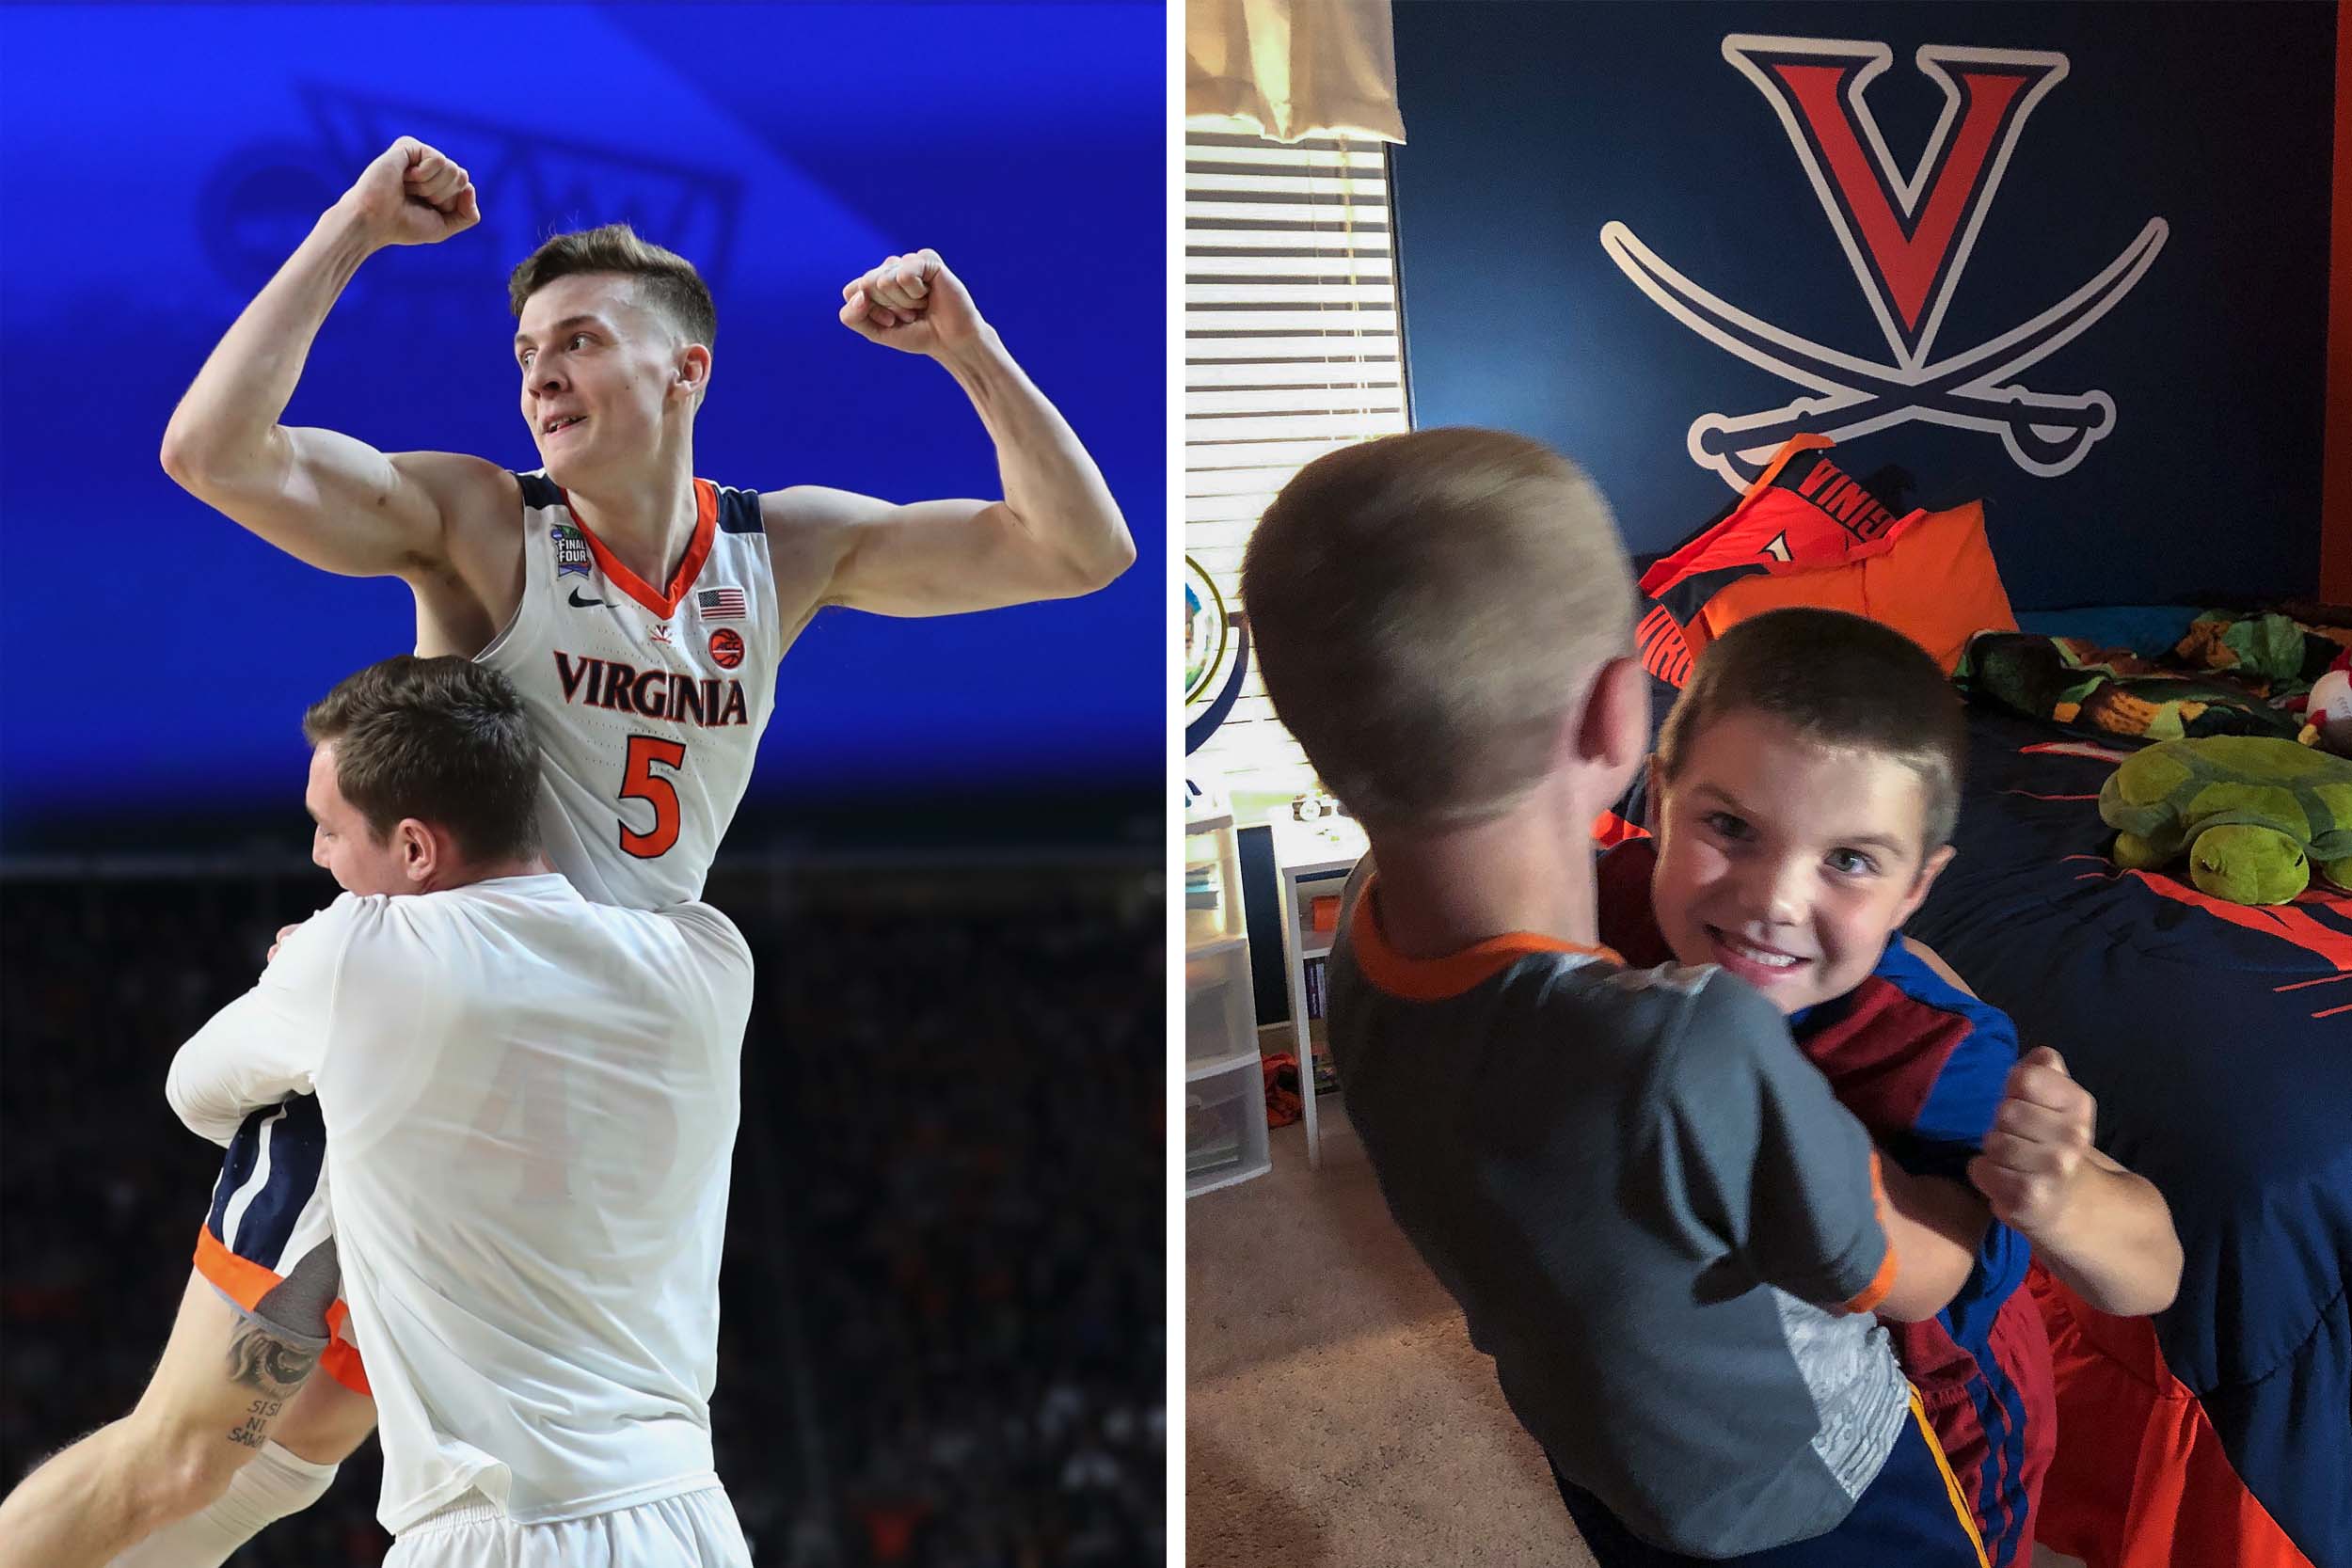 Left: Guy being held up by his team mate after championship win.  Right: two children recreating the picture on the left